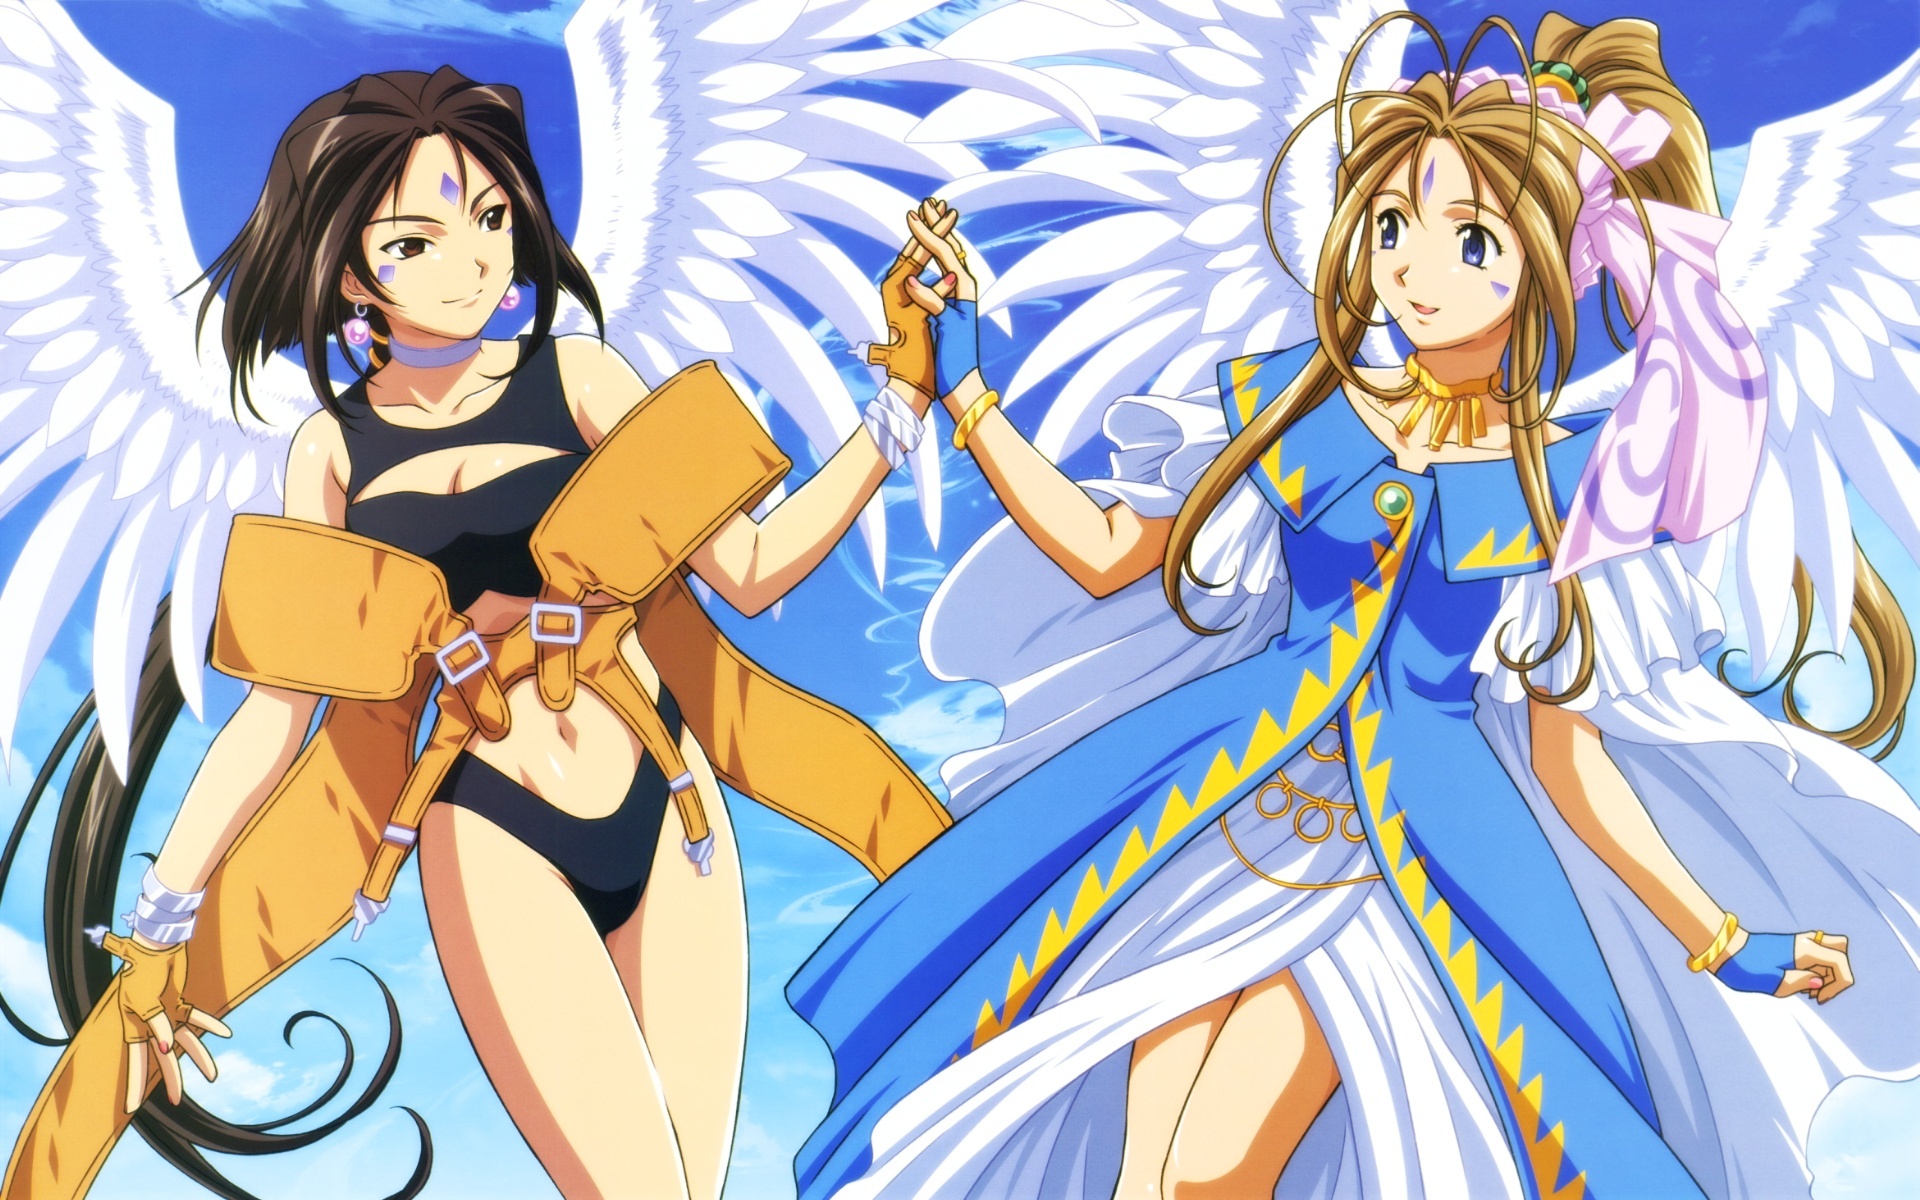 Belldandy and Peorth, two anime goddesses with wings, radiating divine beauty.